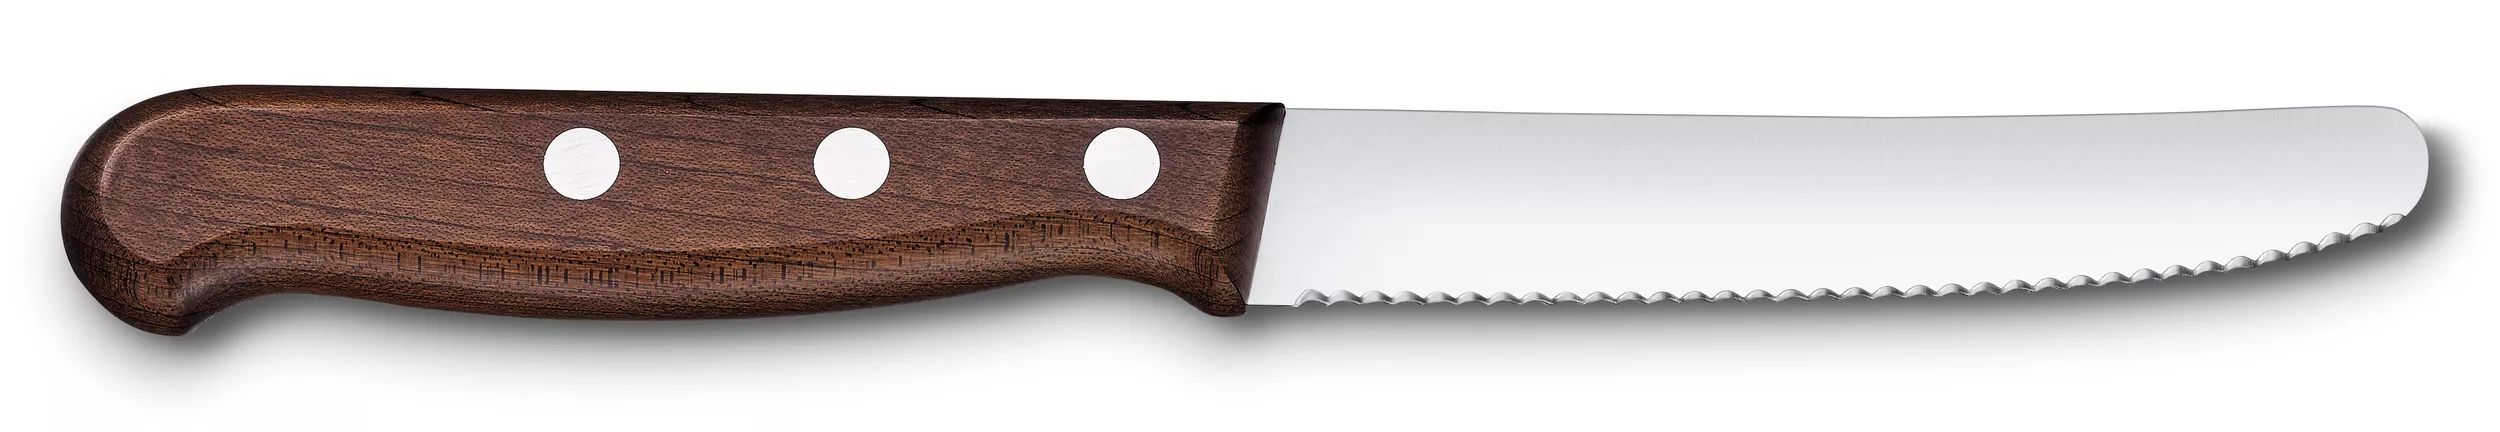 Wood Tomato and Table Knife - 5.0830.11G